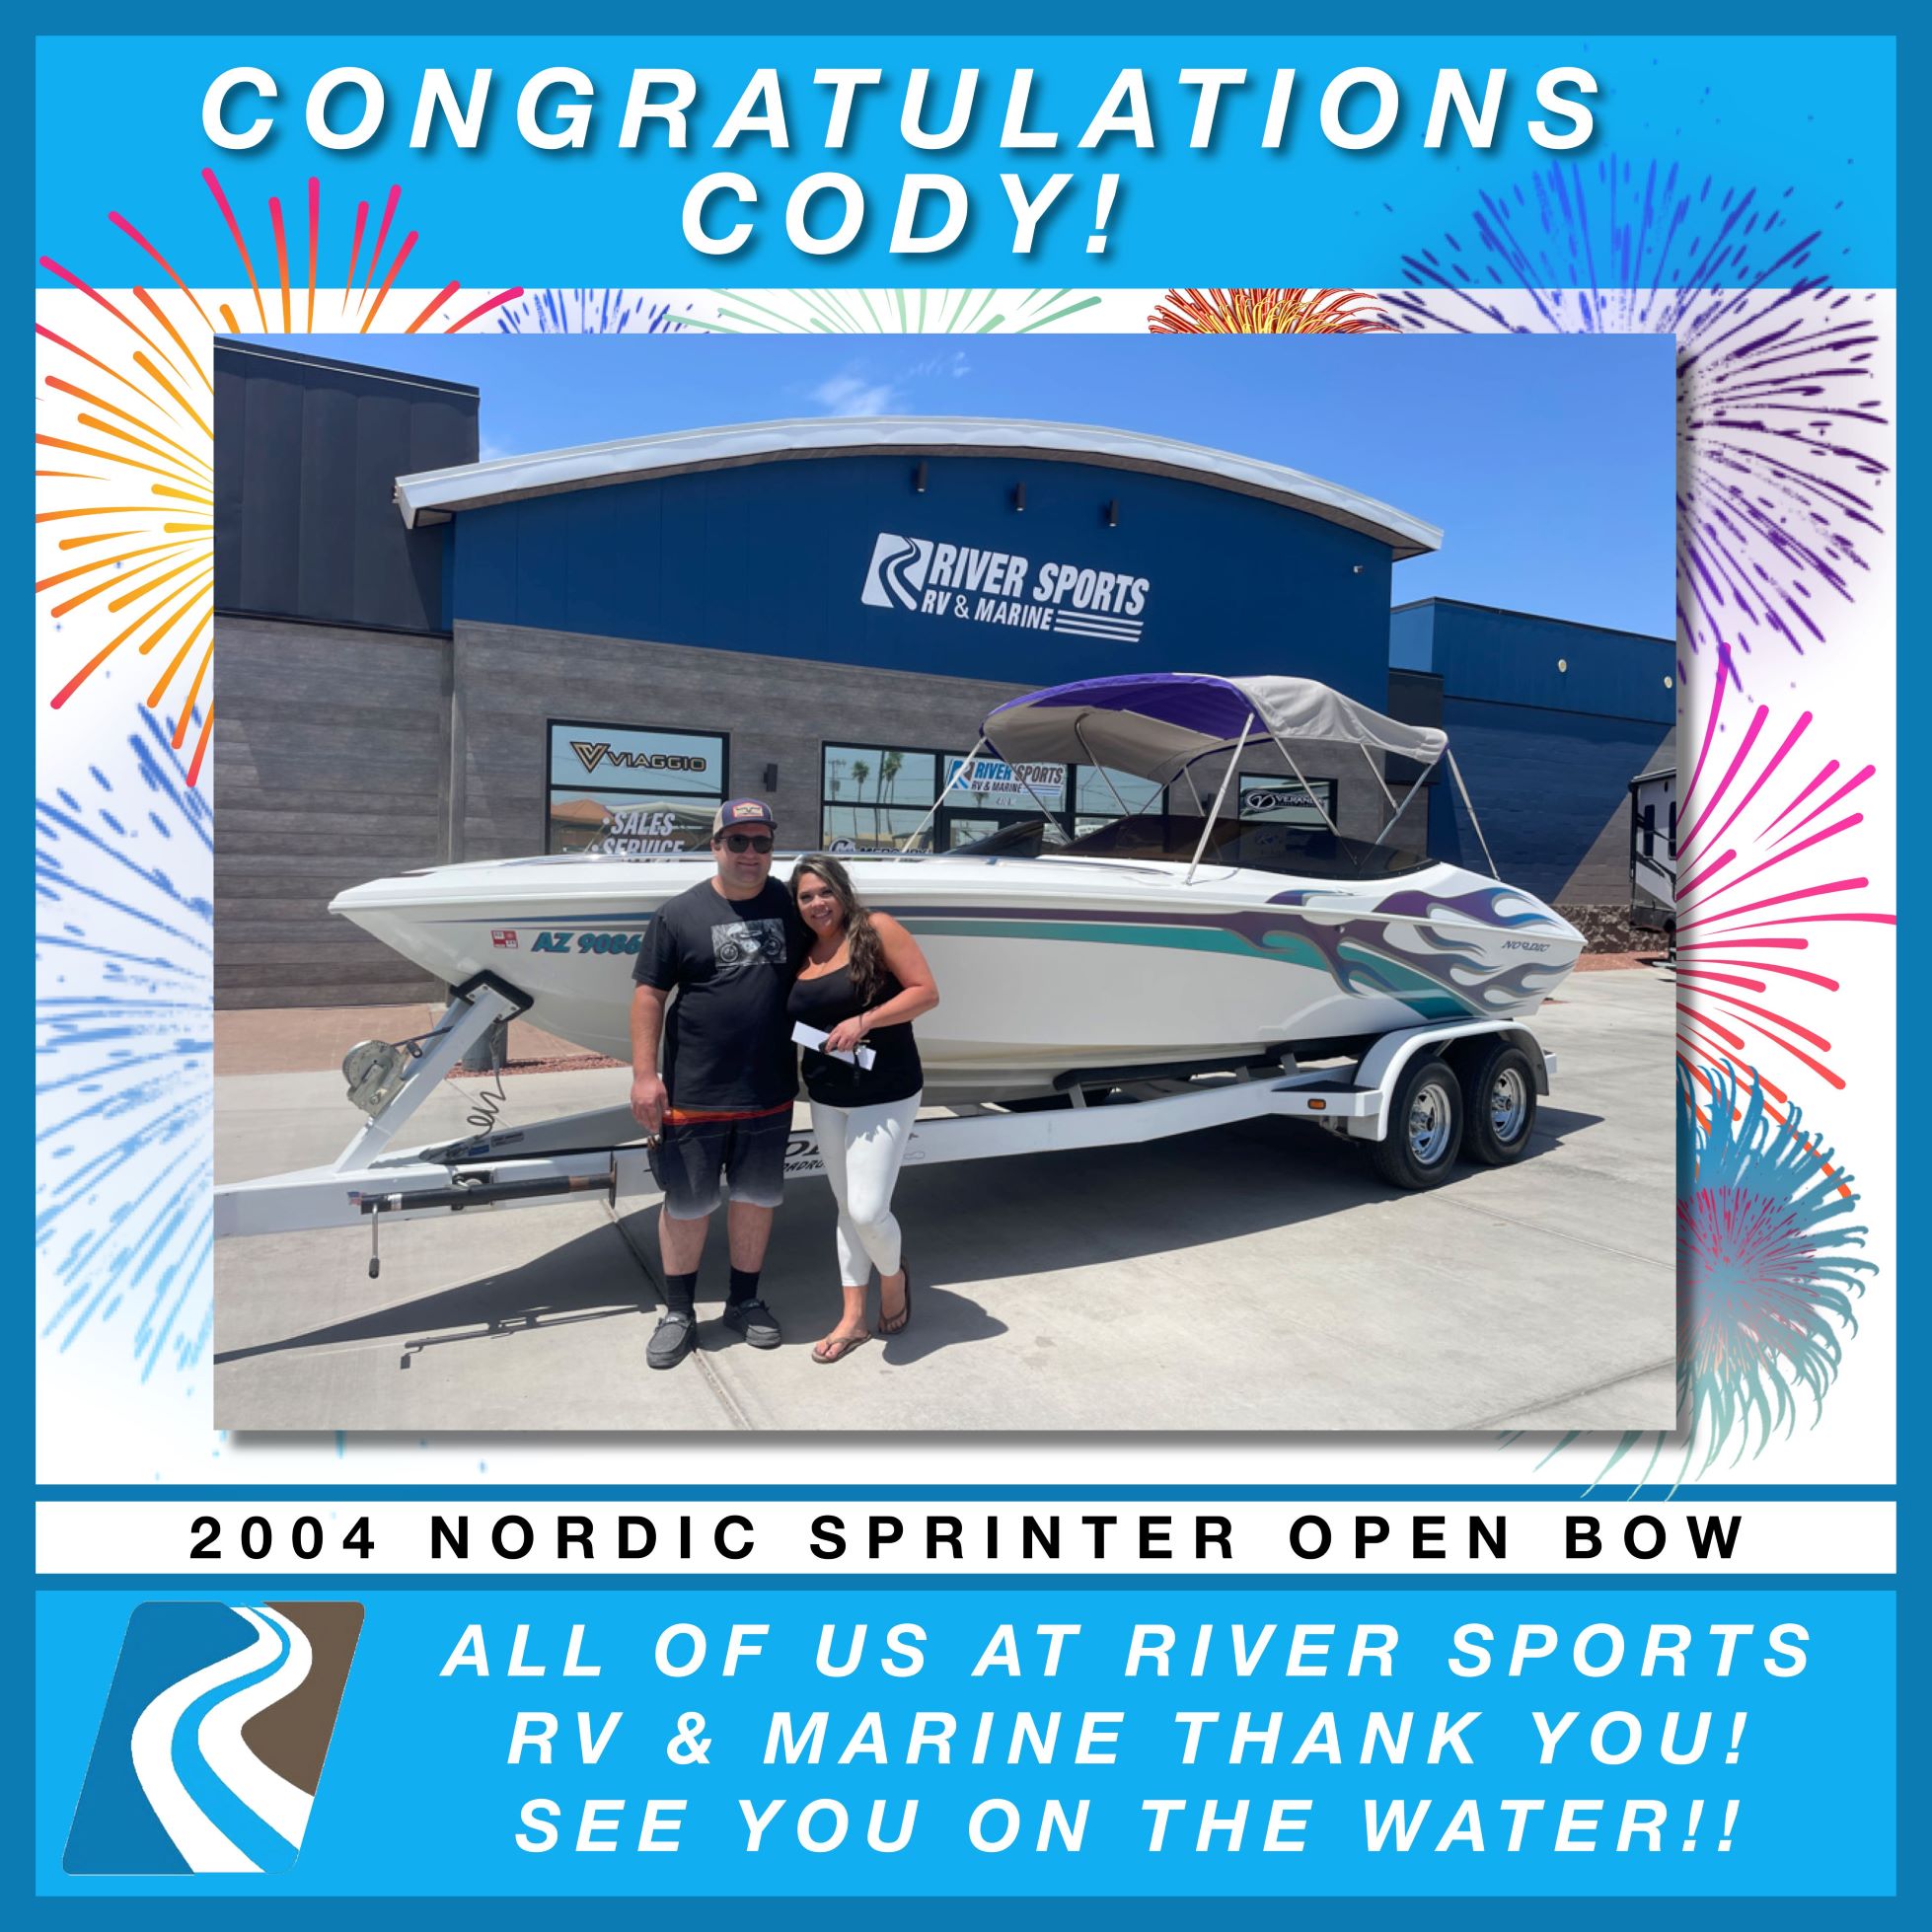 Cody with his 2004 Nordic bought at River Sports RV and Marine